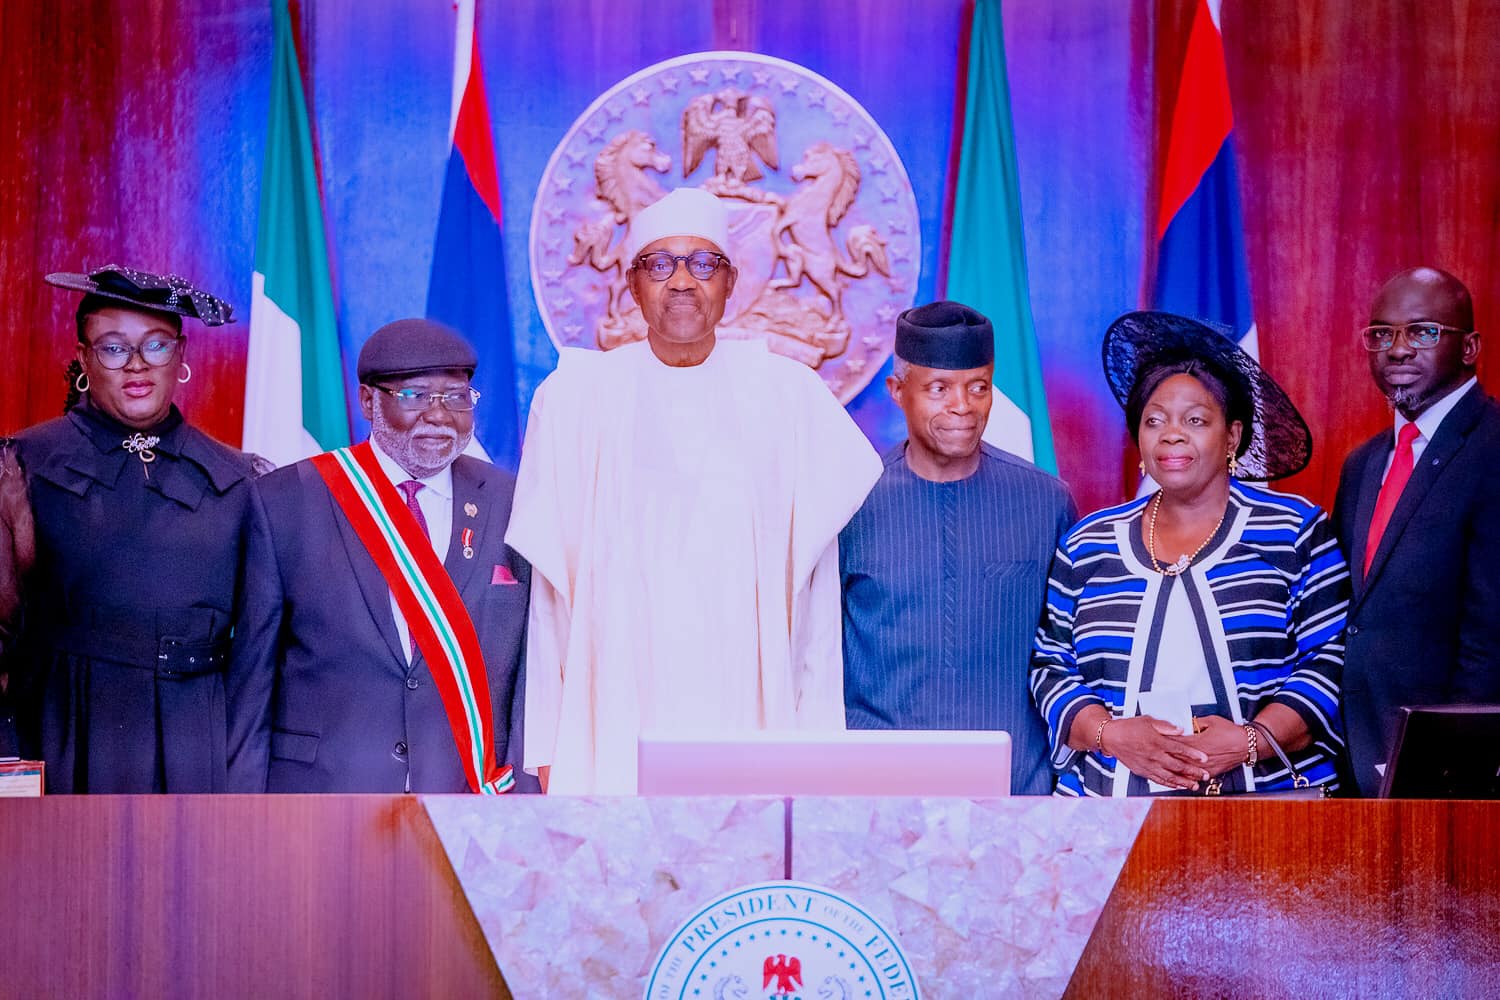 President Muhammadu Buhari, Vice President Yemi Osinbajo, Justice Olukayode Ariwoola and members of his family after he was sworn in as substantive Chief Justice of Nigeria at the Council chamber of the State House, Abuja, on Wednesday.